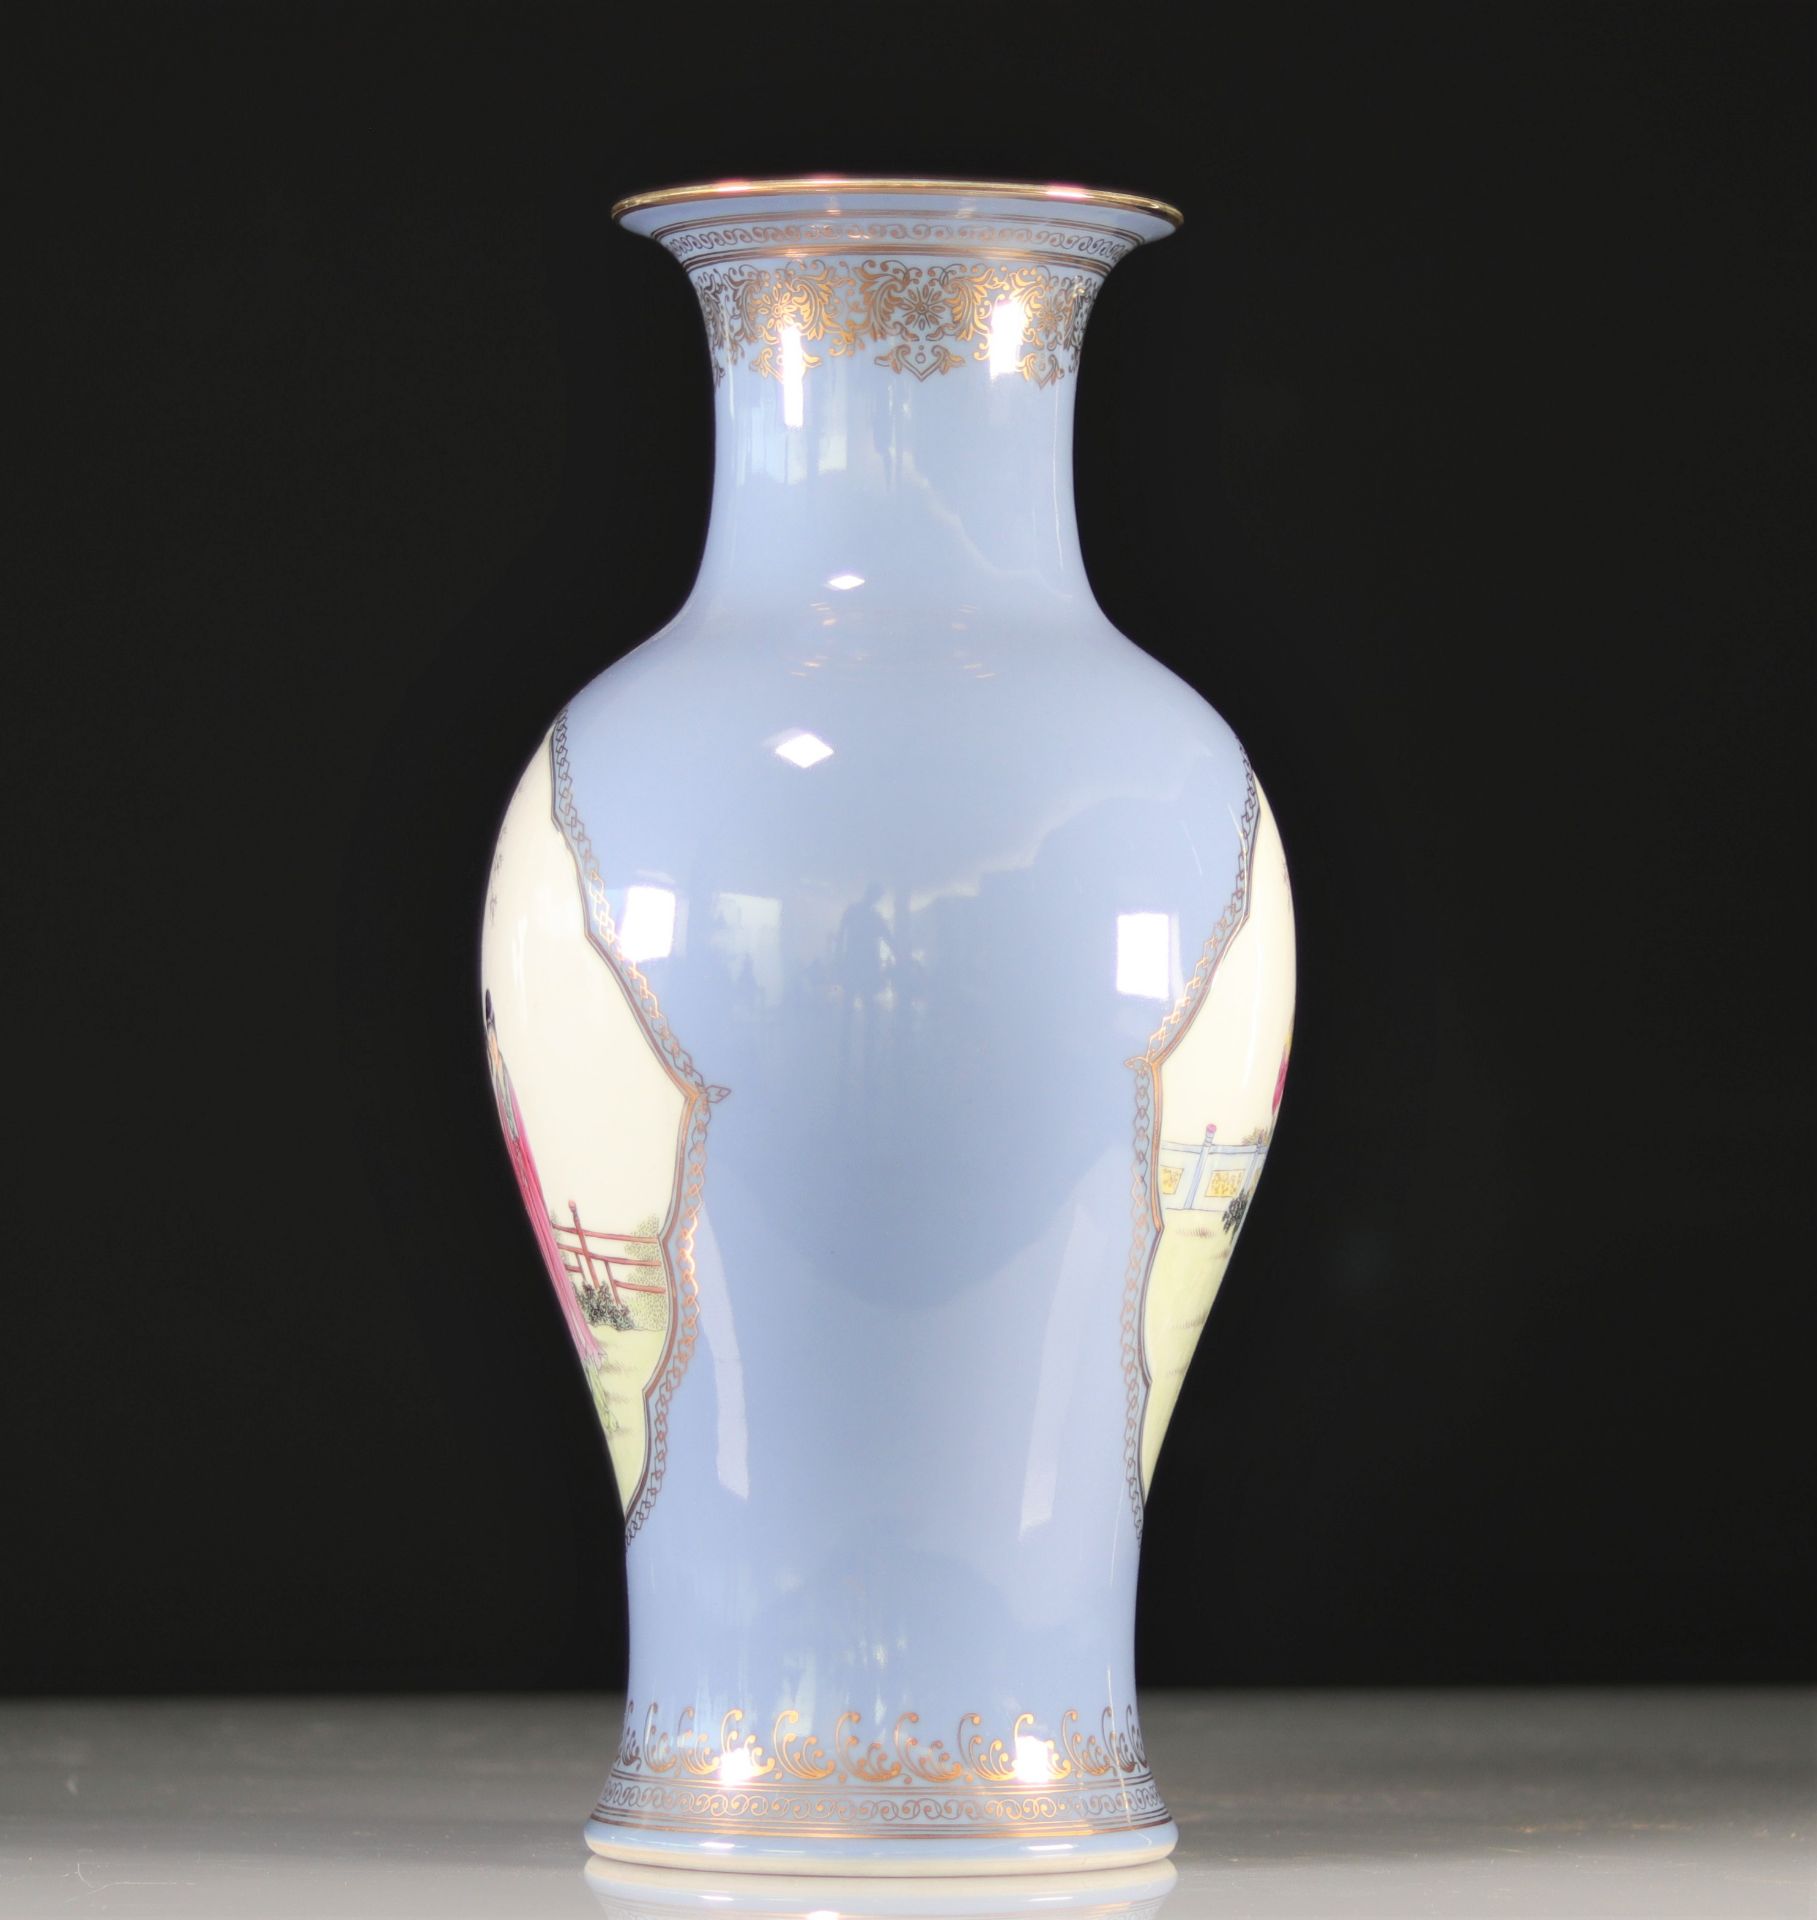 Family rose vase lavender blue background and gold double cartridges Qianlong brand - Image 5 of 5